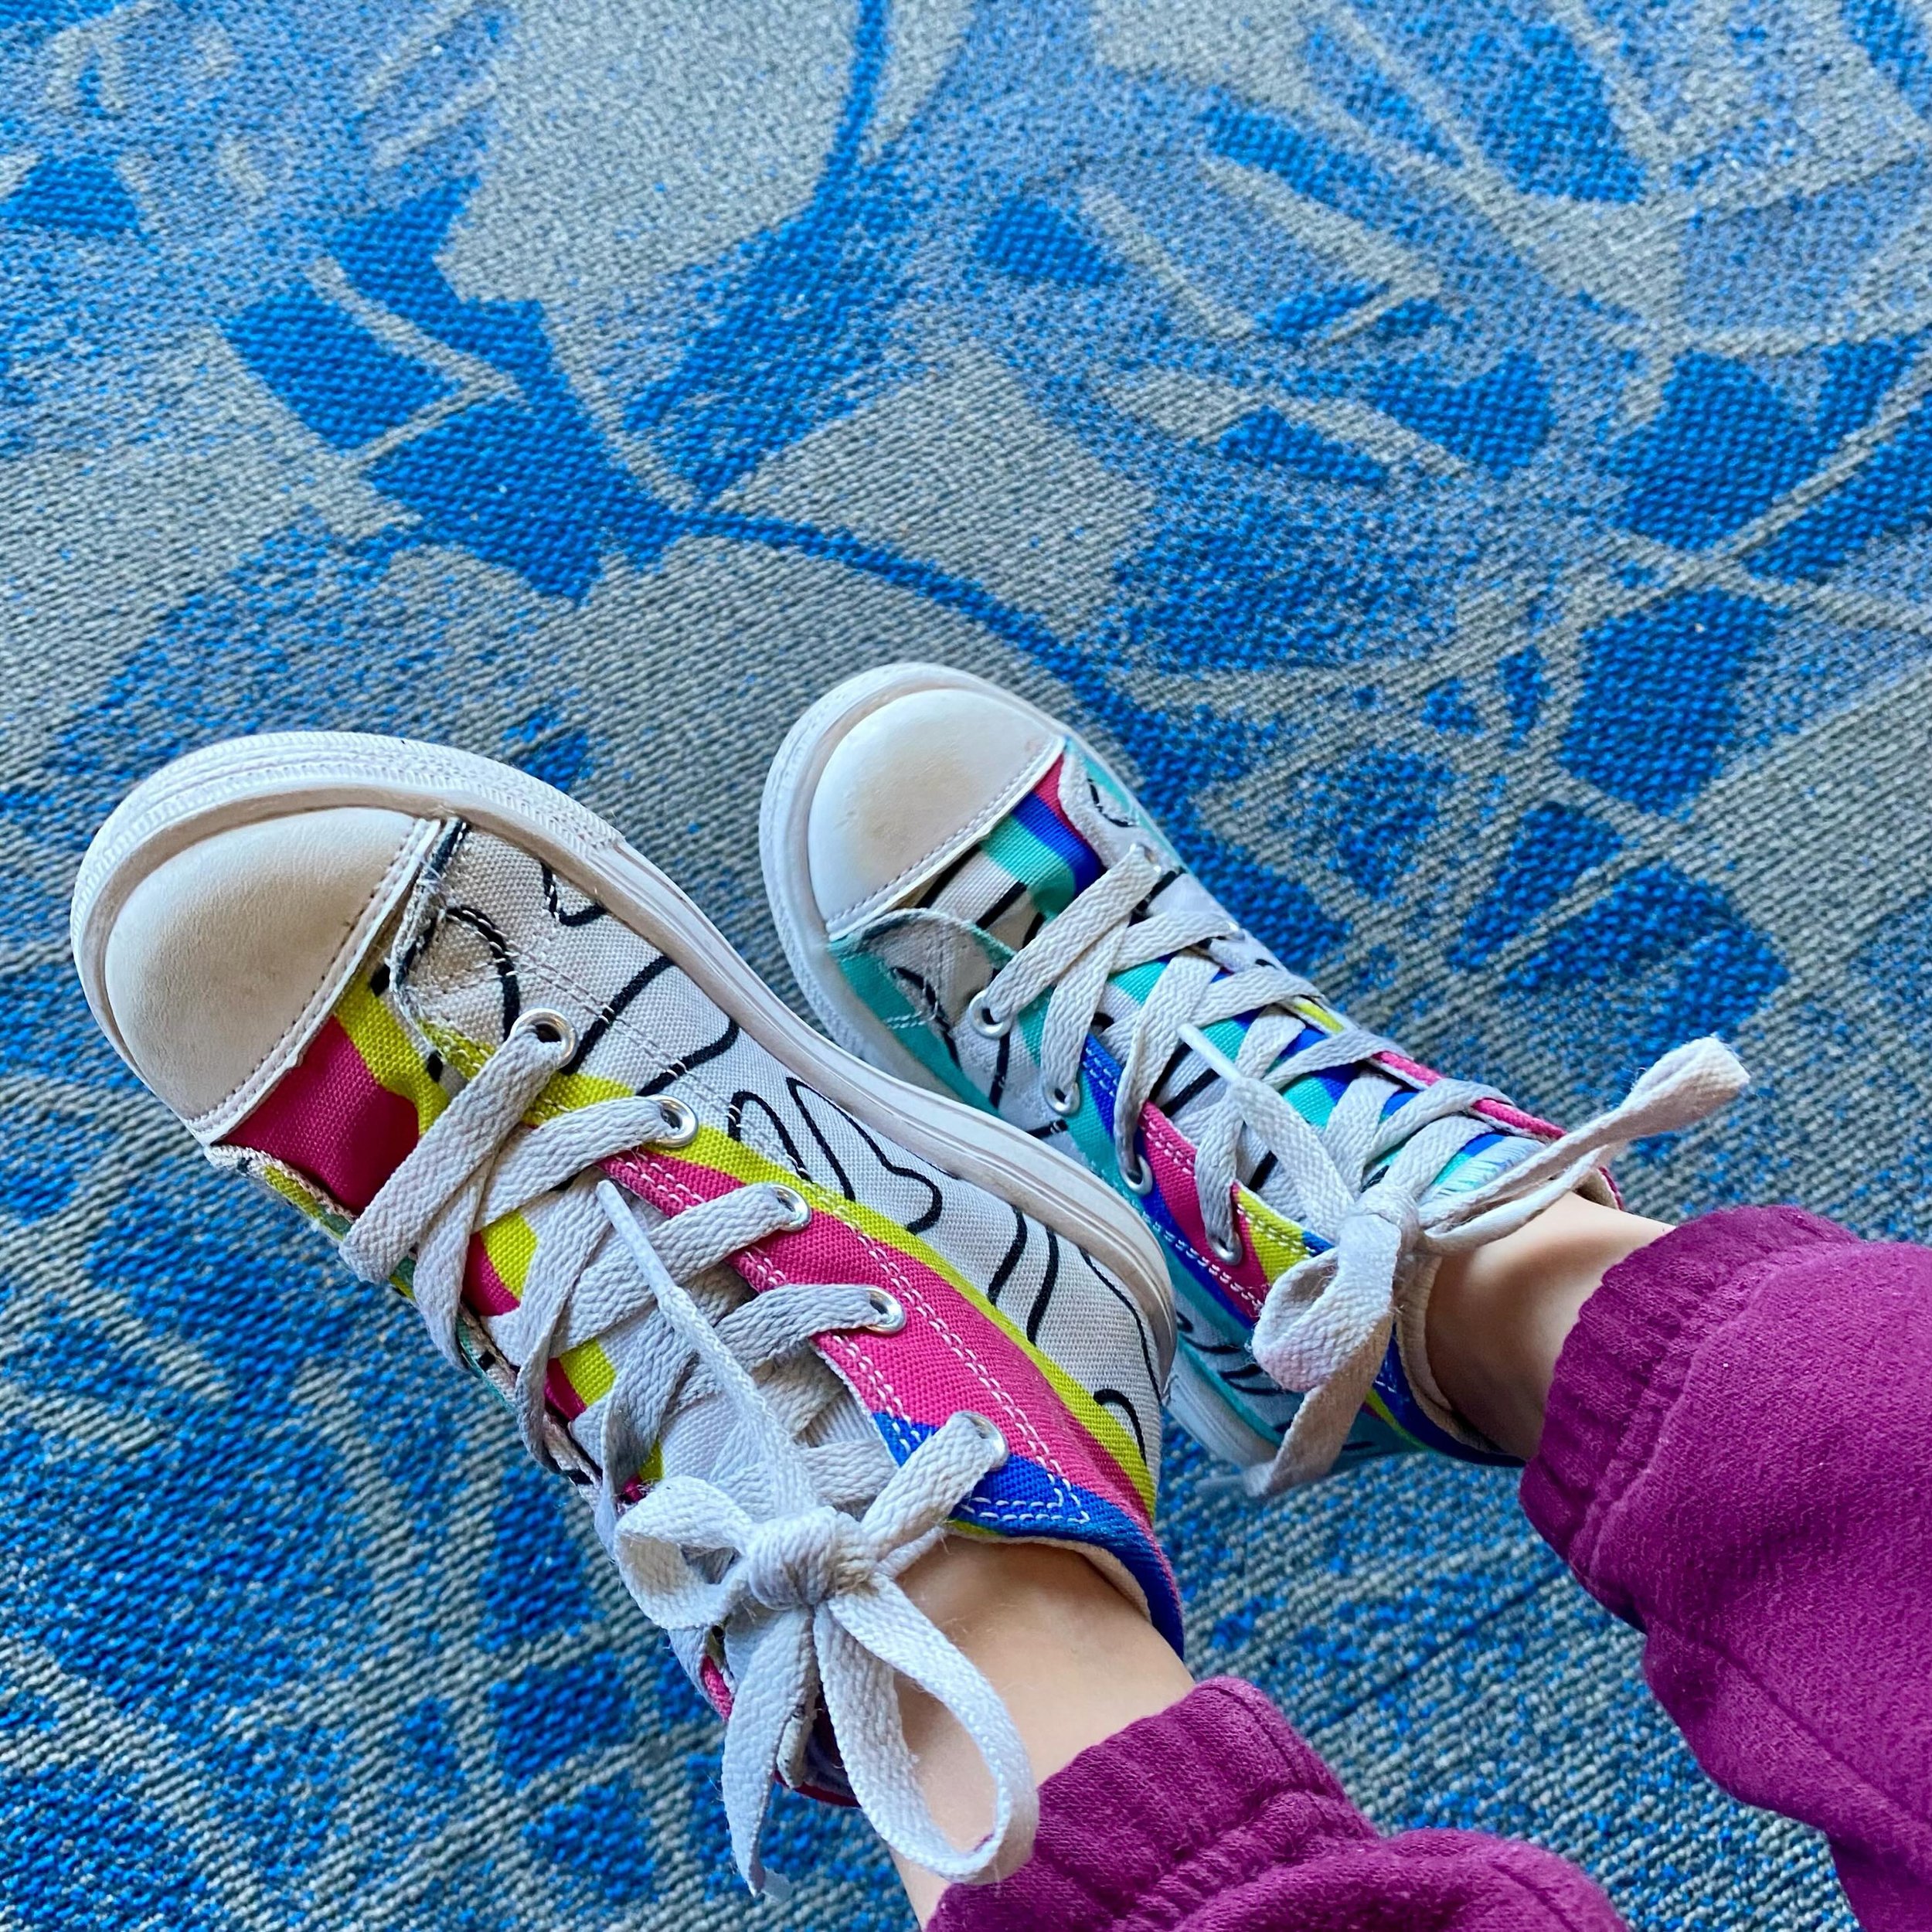 Fly little feet next to me 🩷💛💚🩵💙 You can get my Sunny Flow sneakers for kids, women, and men. Kids sizes start at size 10( around 4 or 5 years most likely) They look good on everyone that wants to live loud and spread smiles 😁 find them in my s